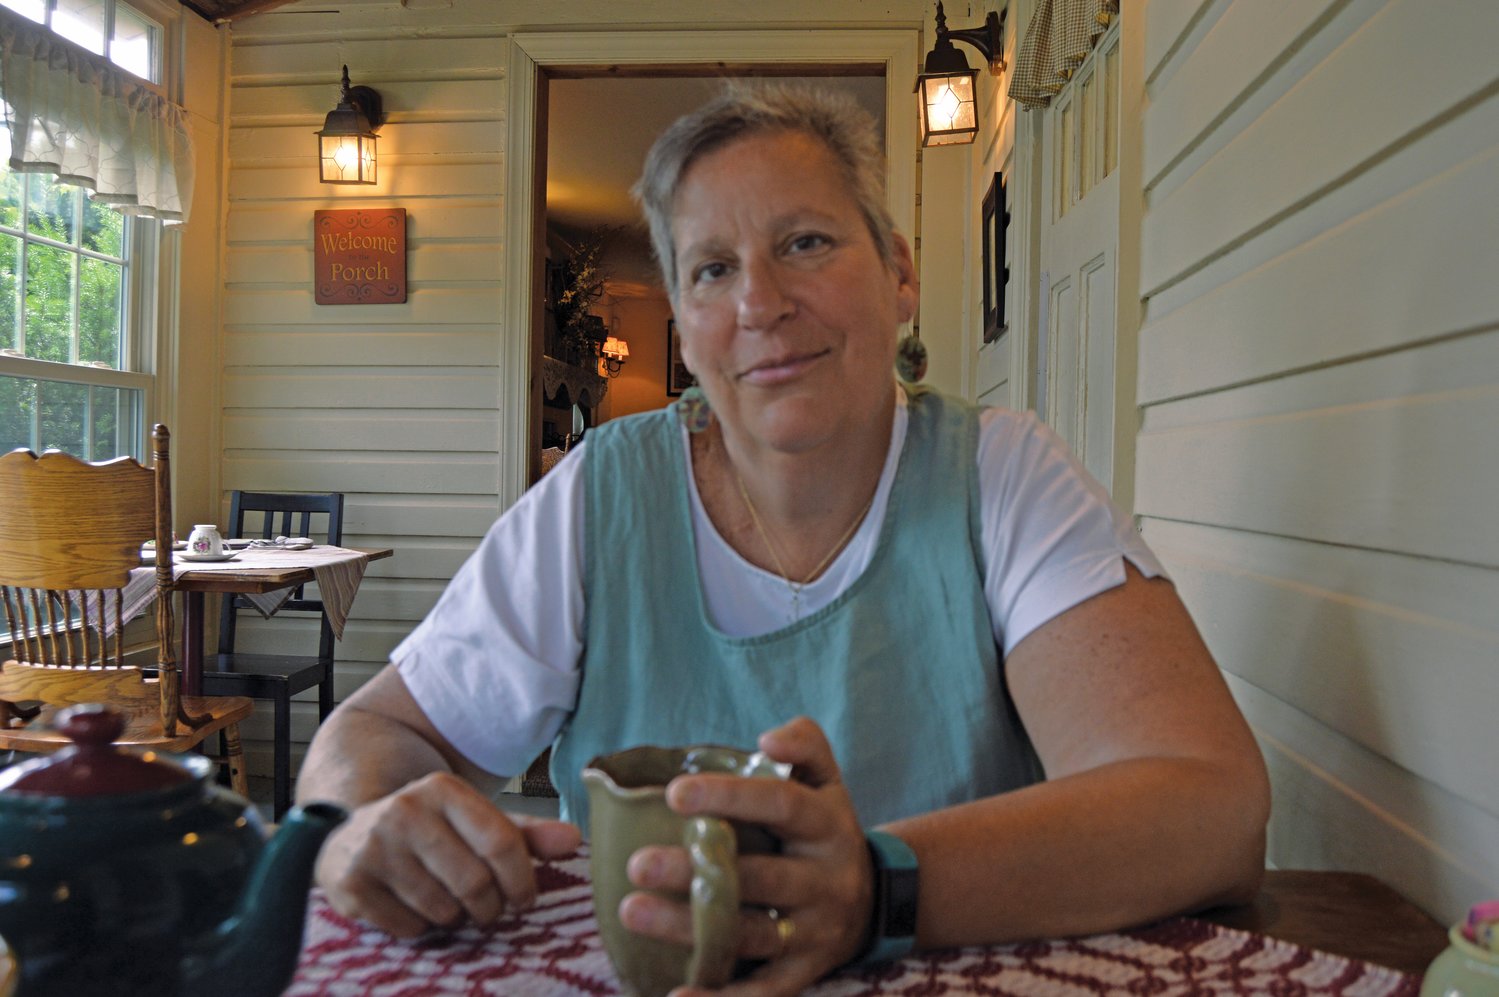 Kathy Heck founded The Talking Teacup in Chalfont.